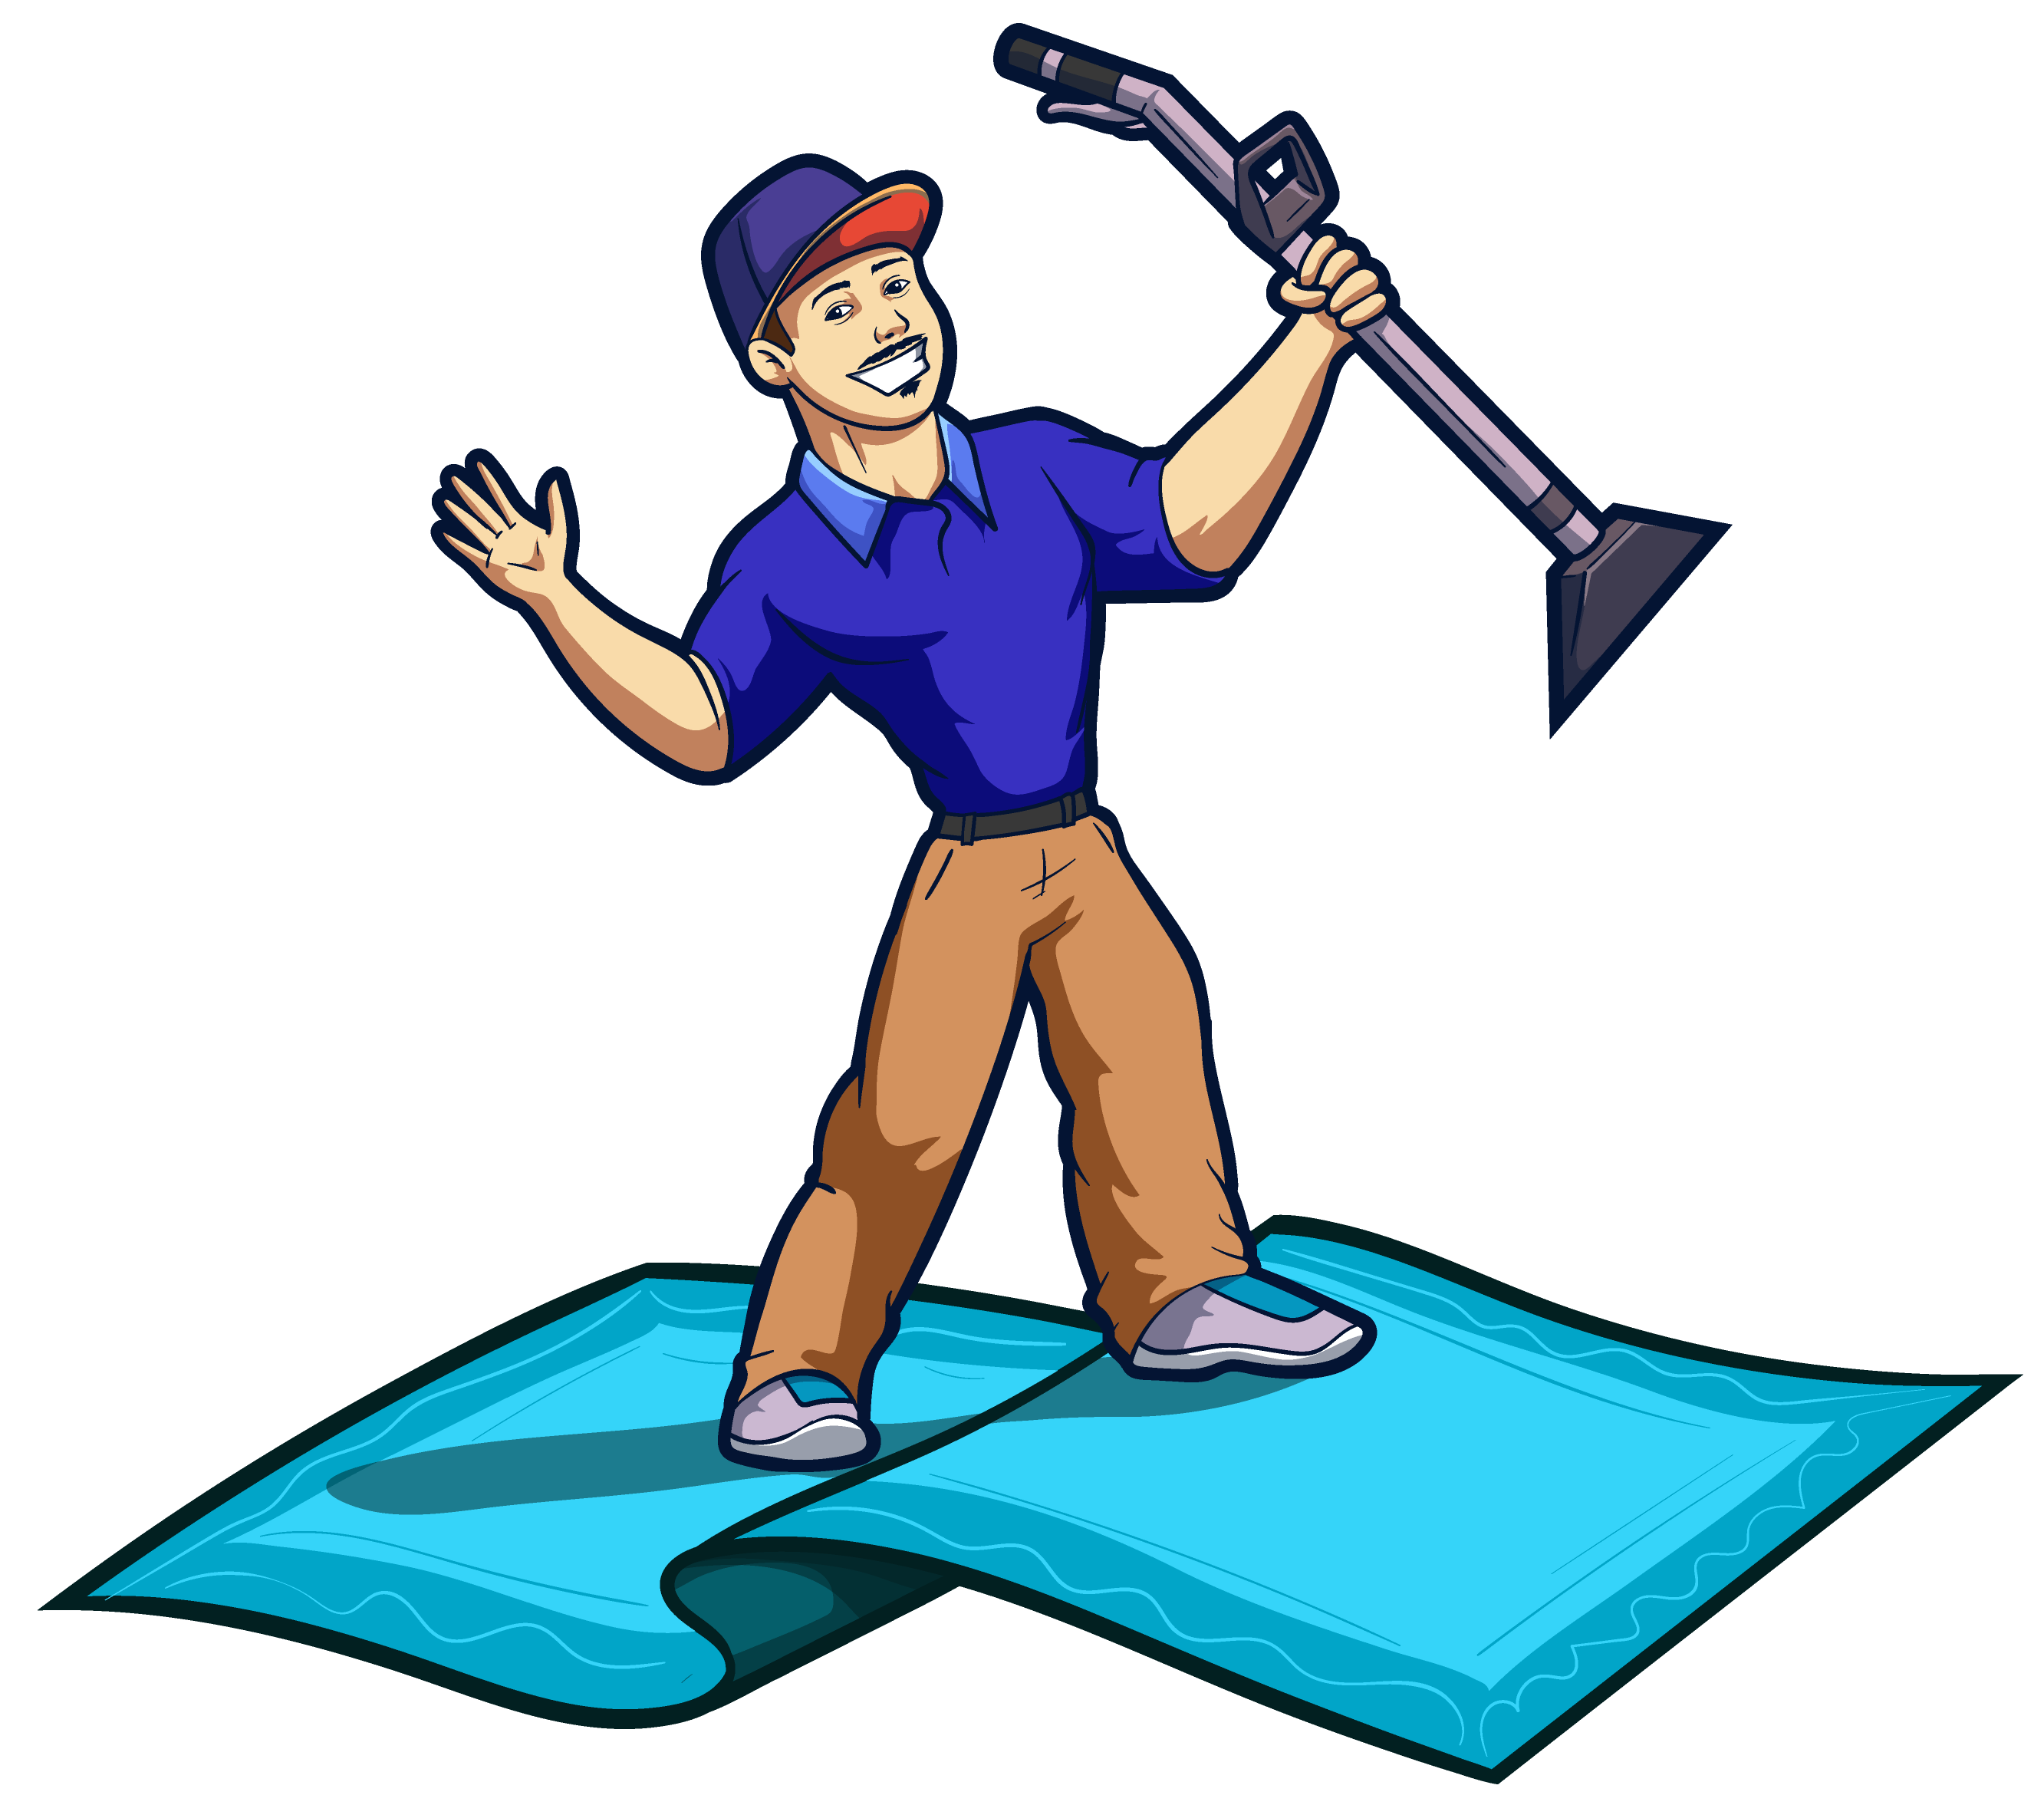 CARPET CLEANING - Mr. Magic Carpet Cleaning Milwaukee